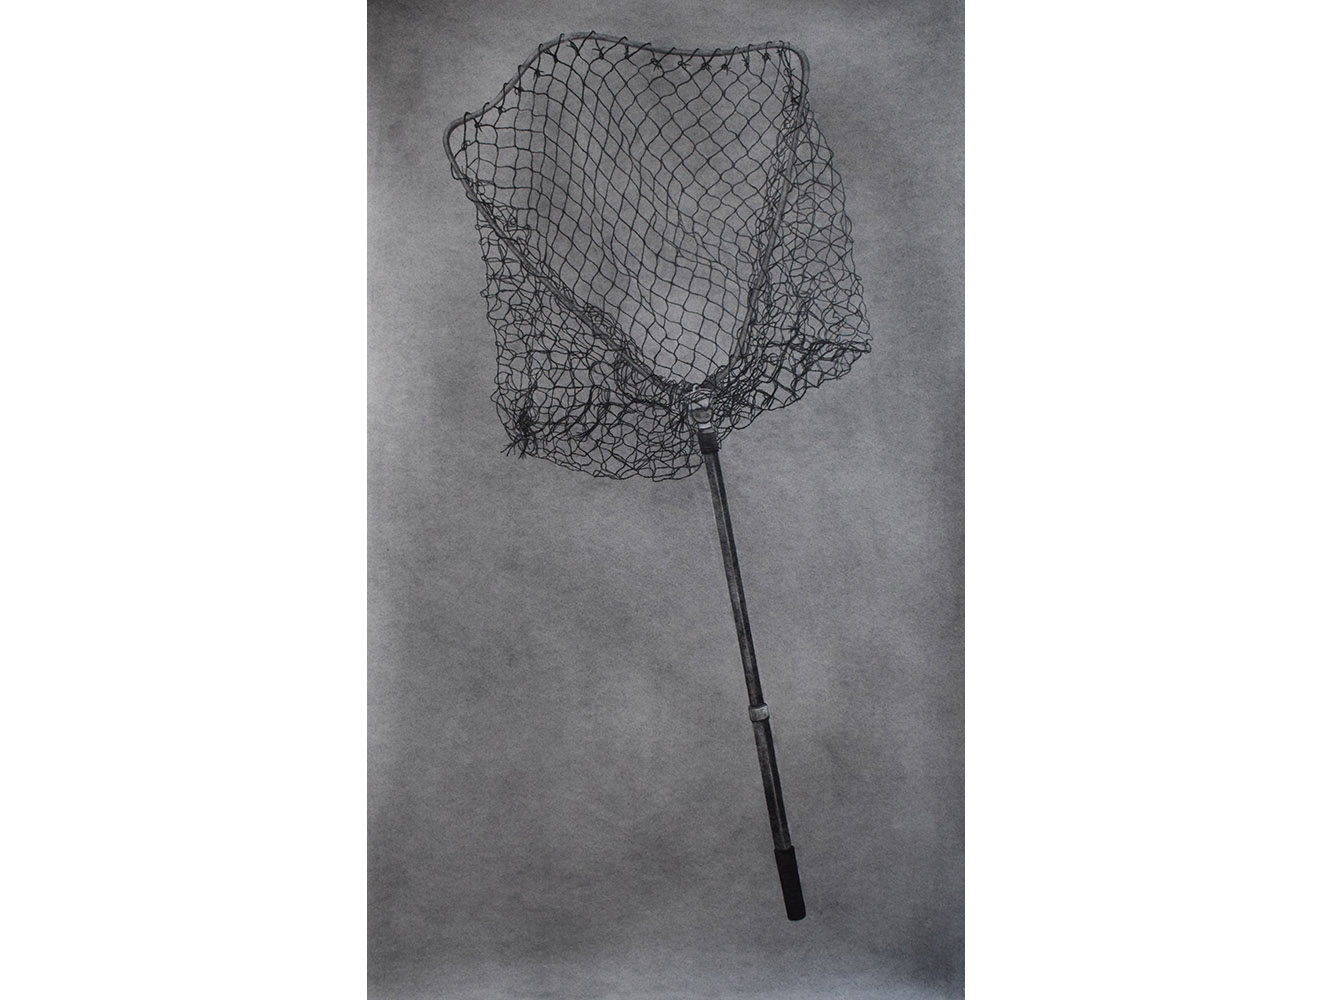 Black and white sketch of a fishing net